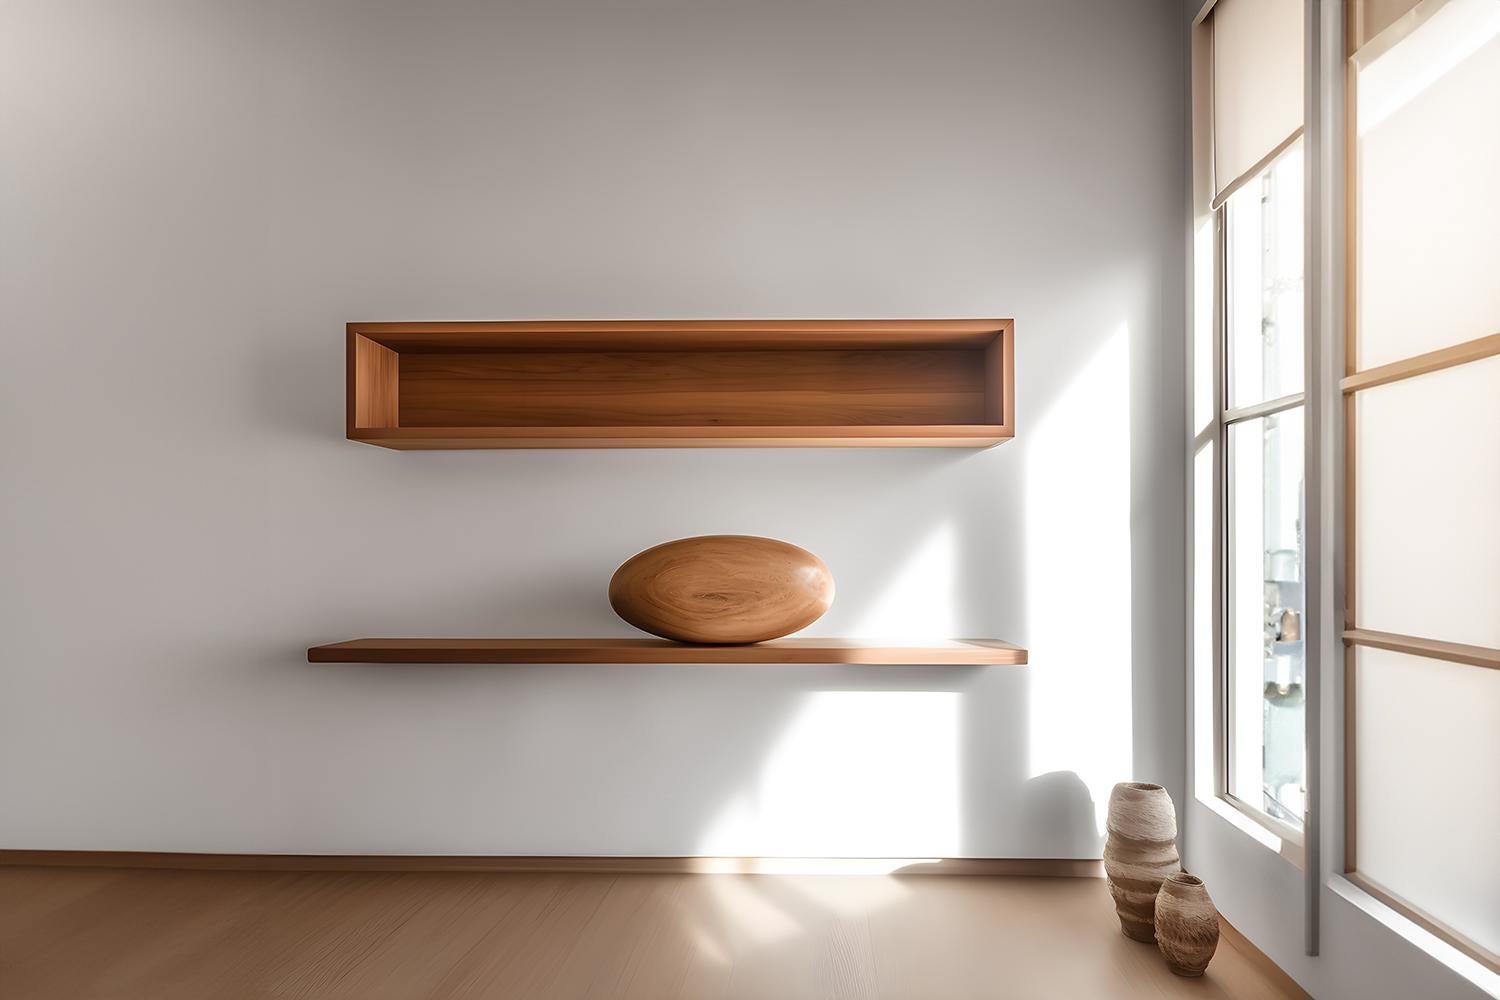 Large Rectangular Floating Shelf with Close Back and One Large Sculptural Wooden Pebble Accent, Sereno by Joel Escalona

—

What happens when the practical becomes art?
What happens when ornamentation gains significance?

Those were the